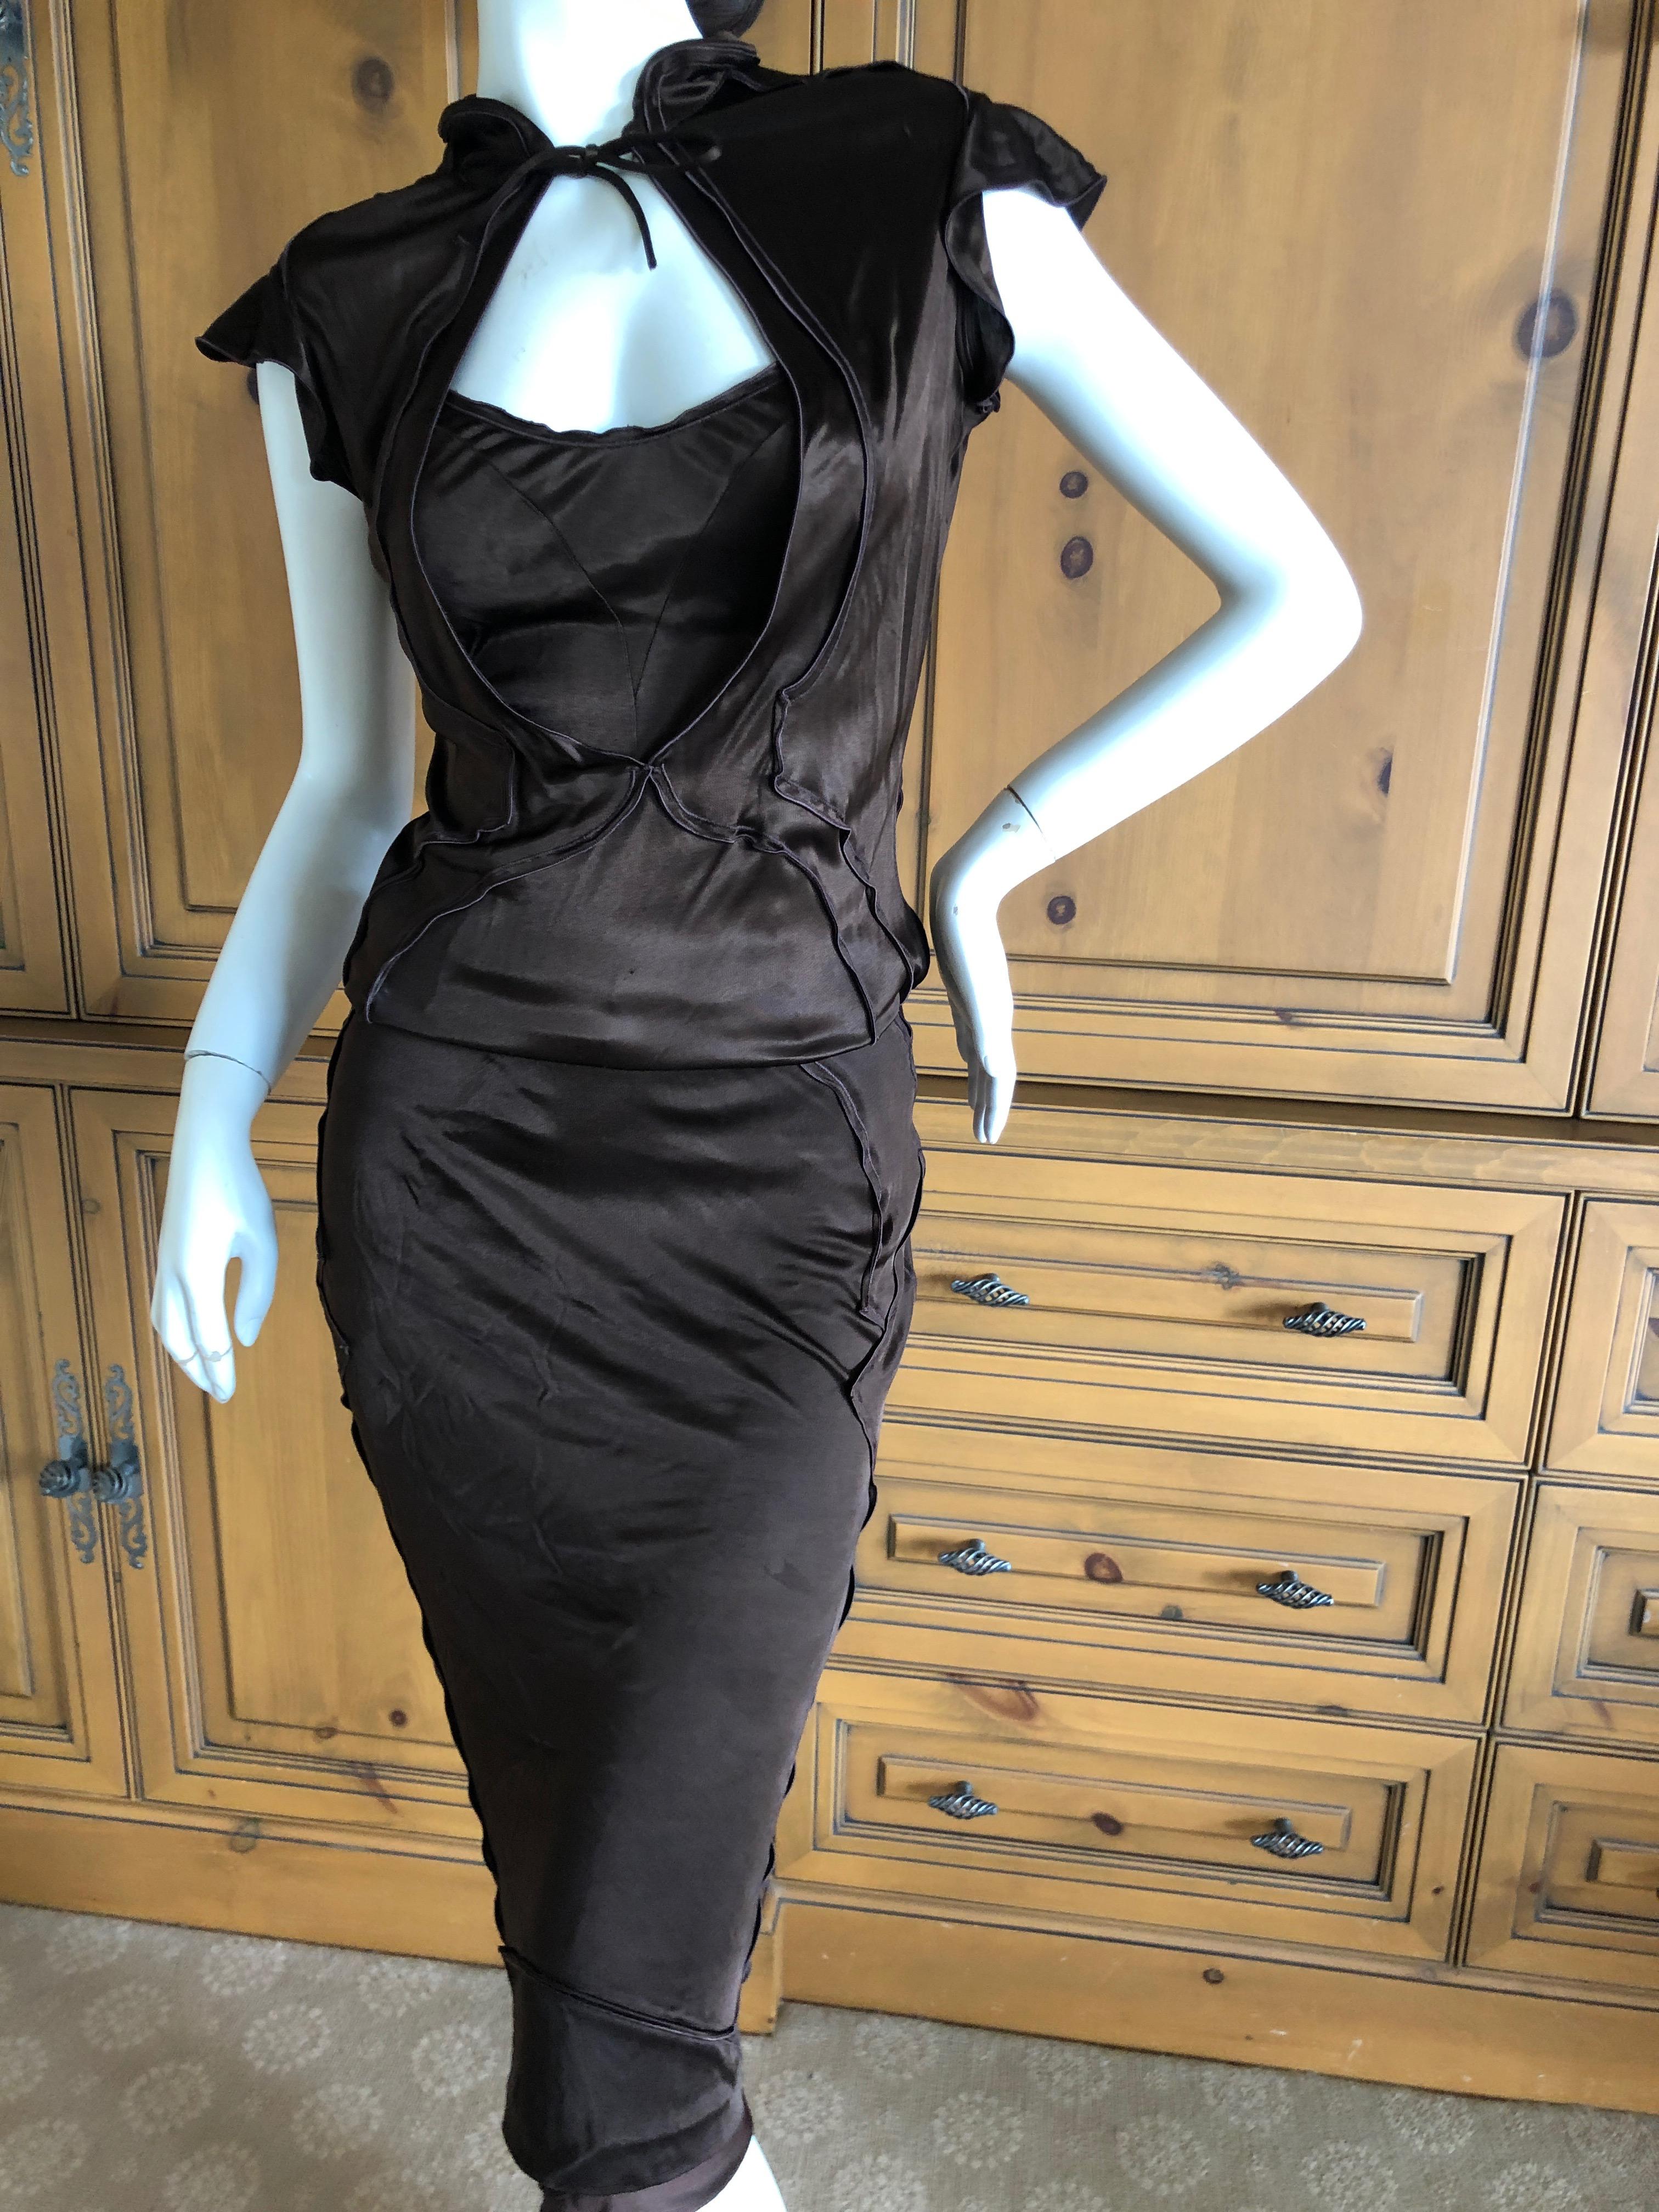 Yves Saint Laurent by Tom Ford Two Piece Silk Dress Set from Fall 2004 In Excellent Condition For Sale In Cloverdale, CA